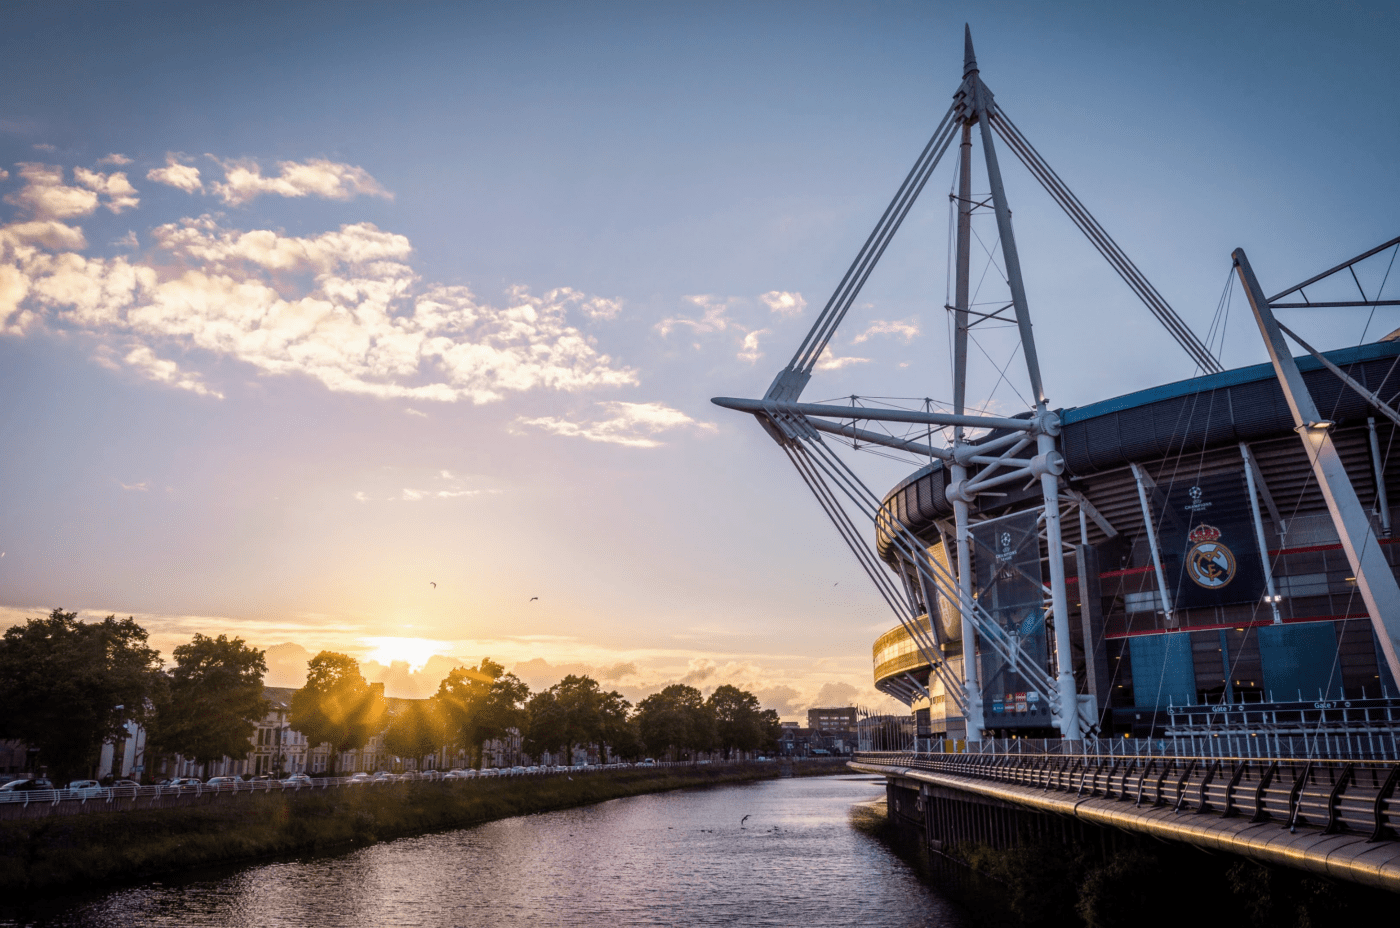 Principality Stadium at Dusk in Cardiff, with a cloudy sky.